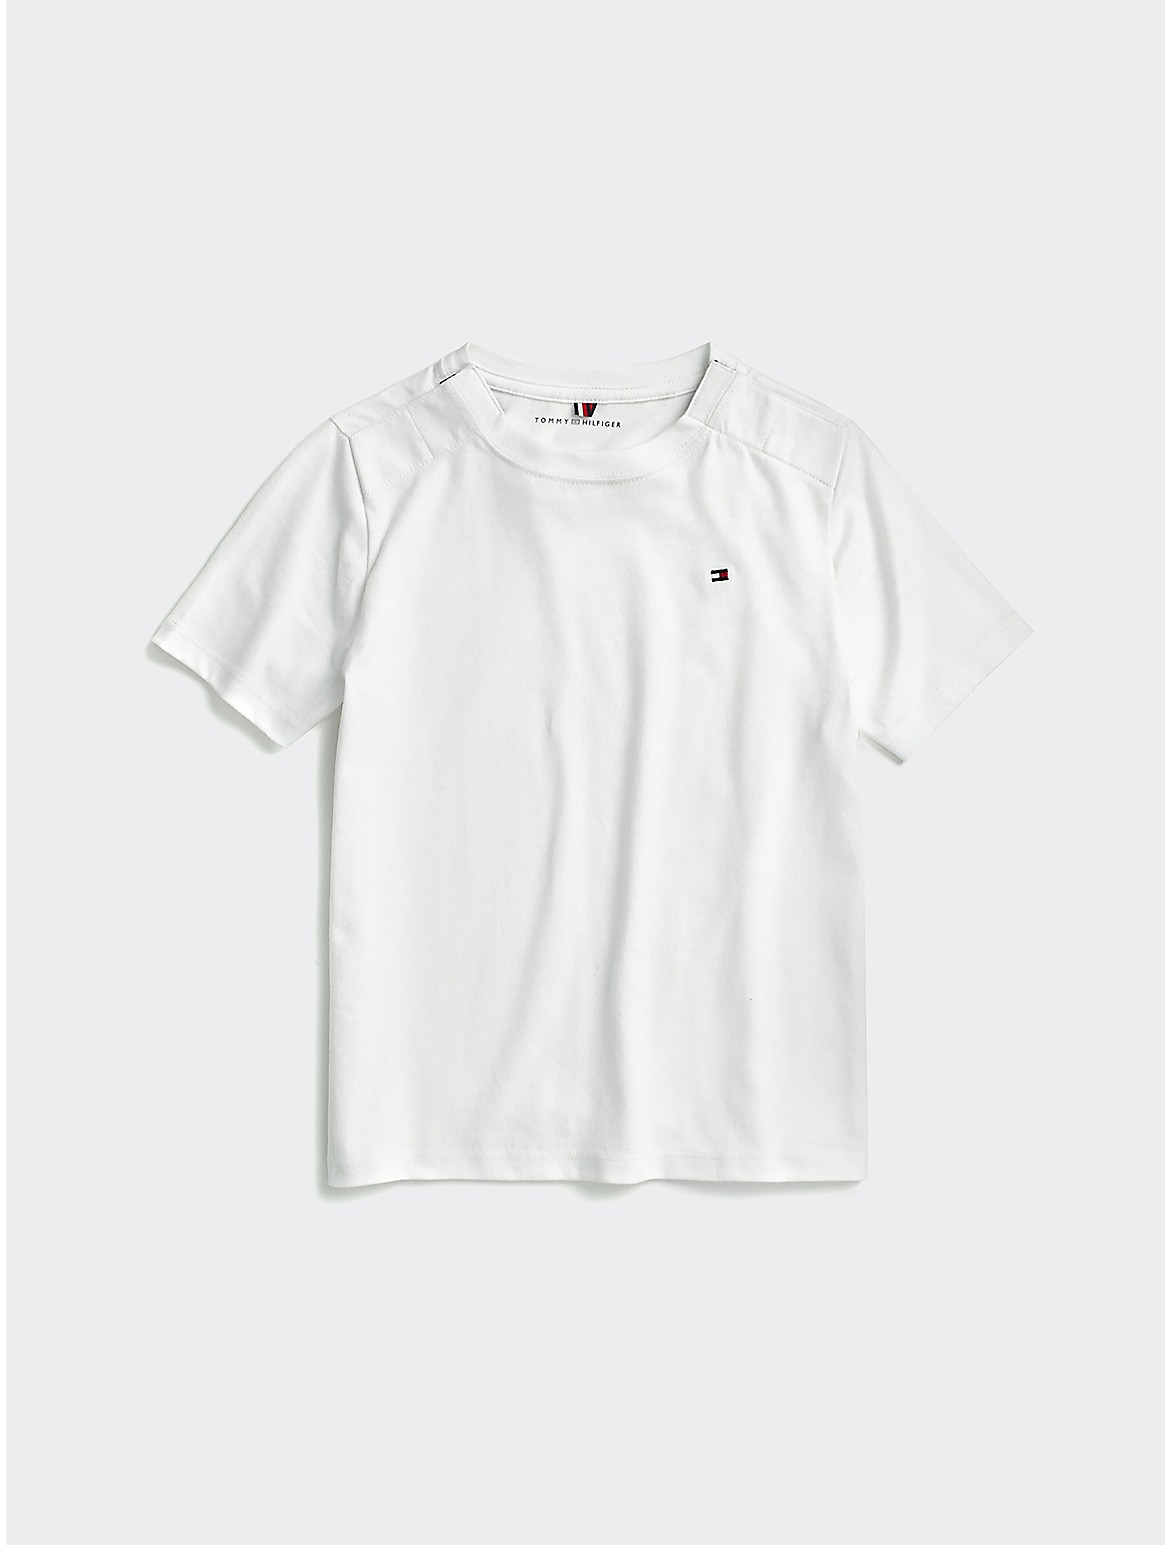 Tommy Hilfiger Boys' Classic T-Shirt - White - S